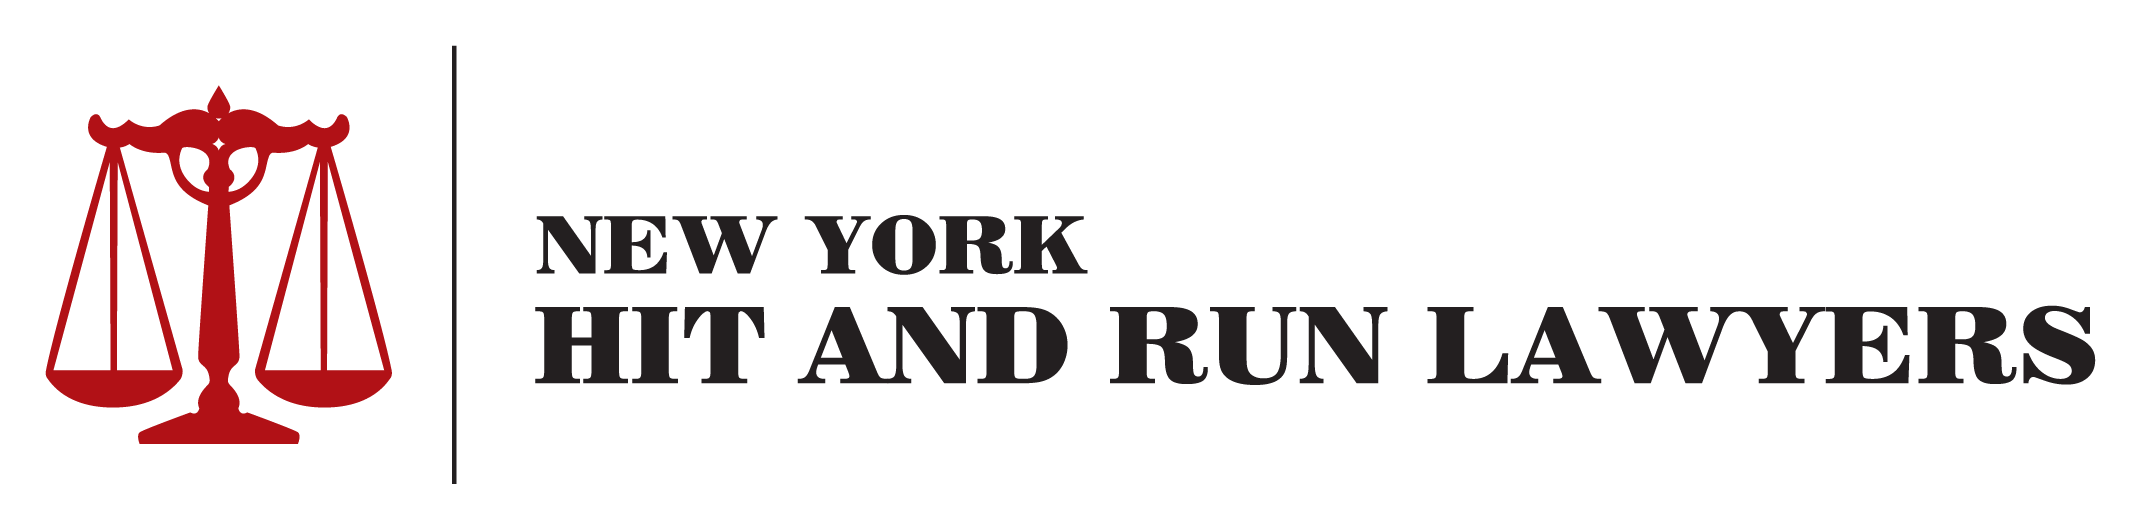 New York Hit and Run Lawyers